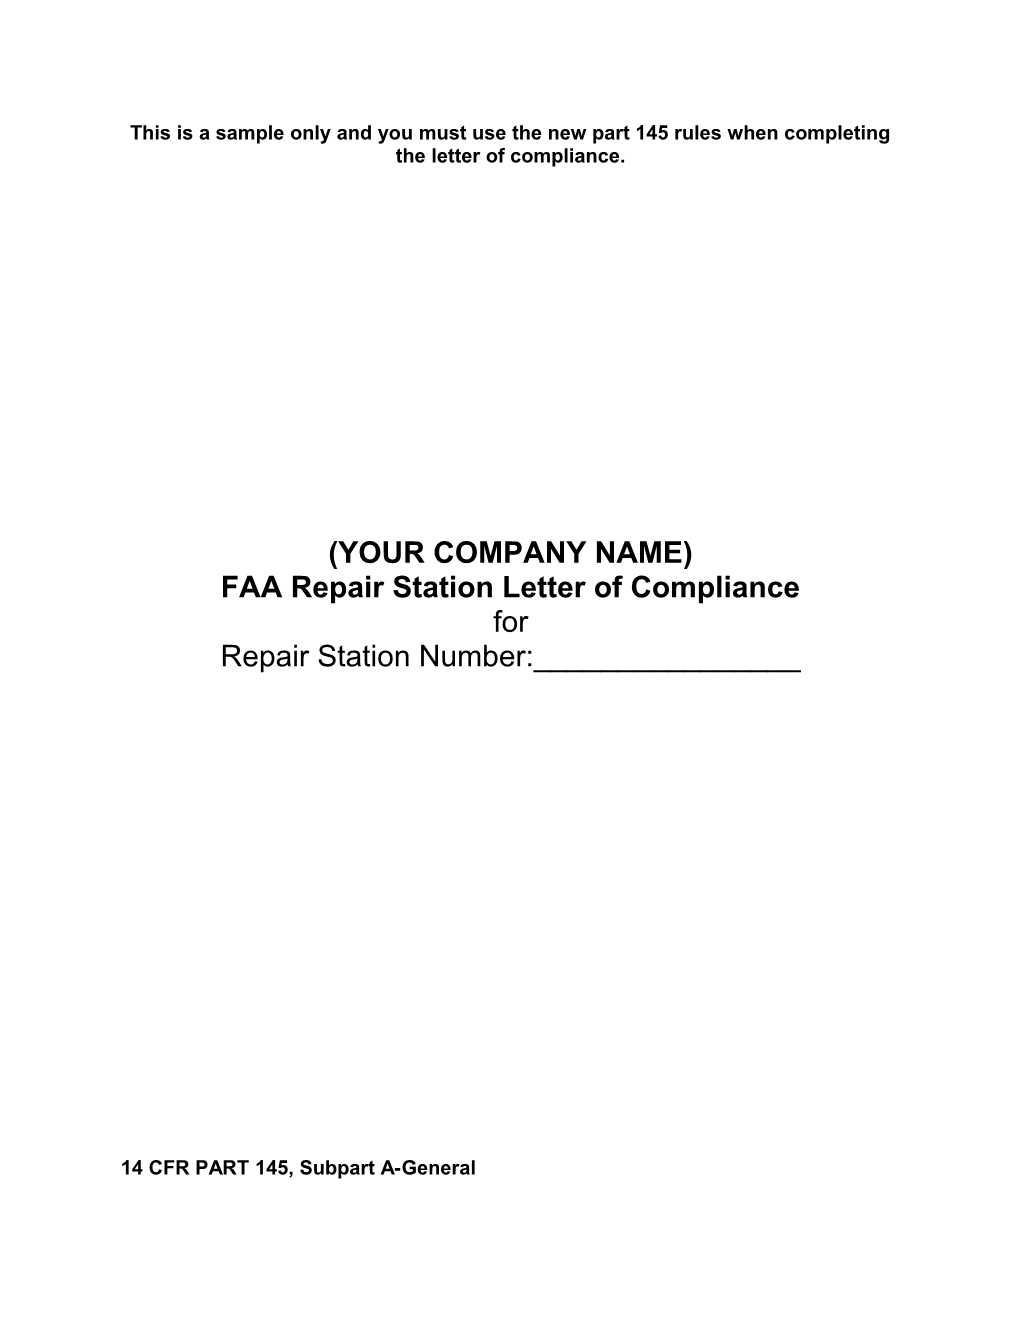 FAA Repair Station Letter of Compliance